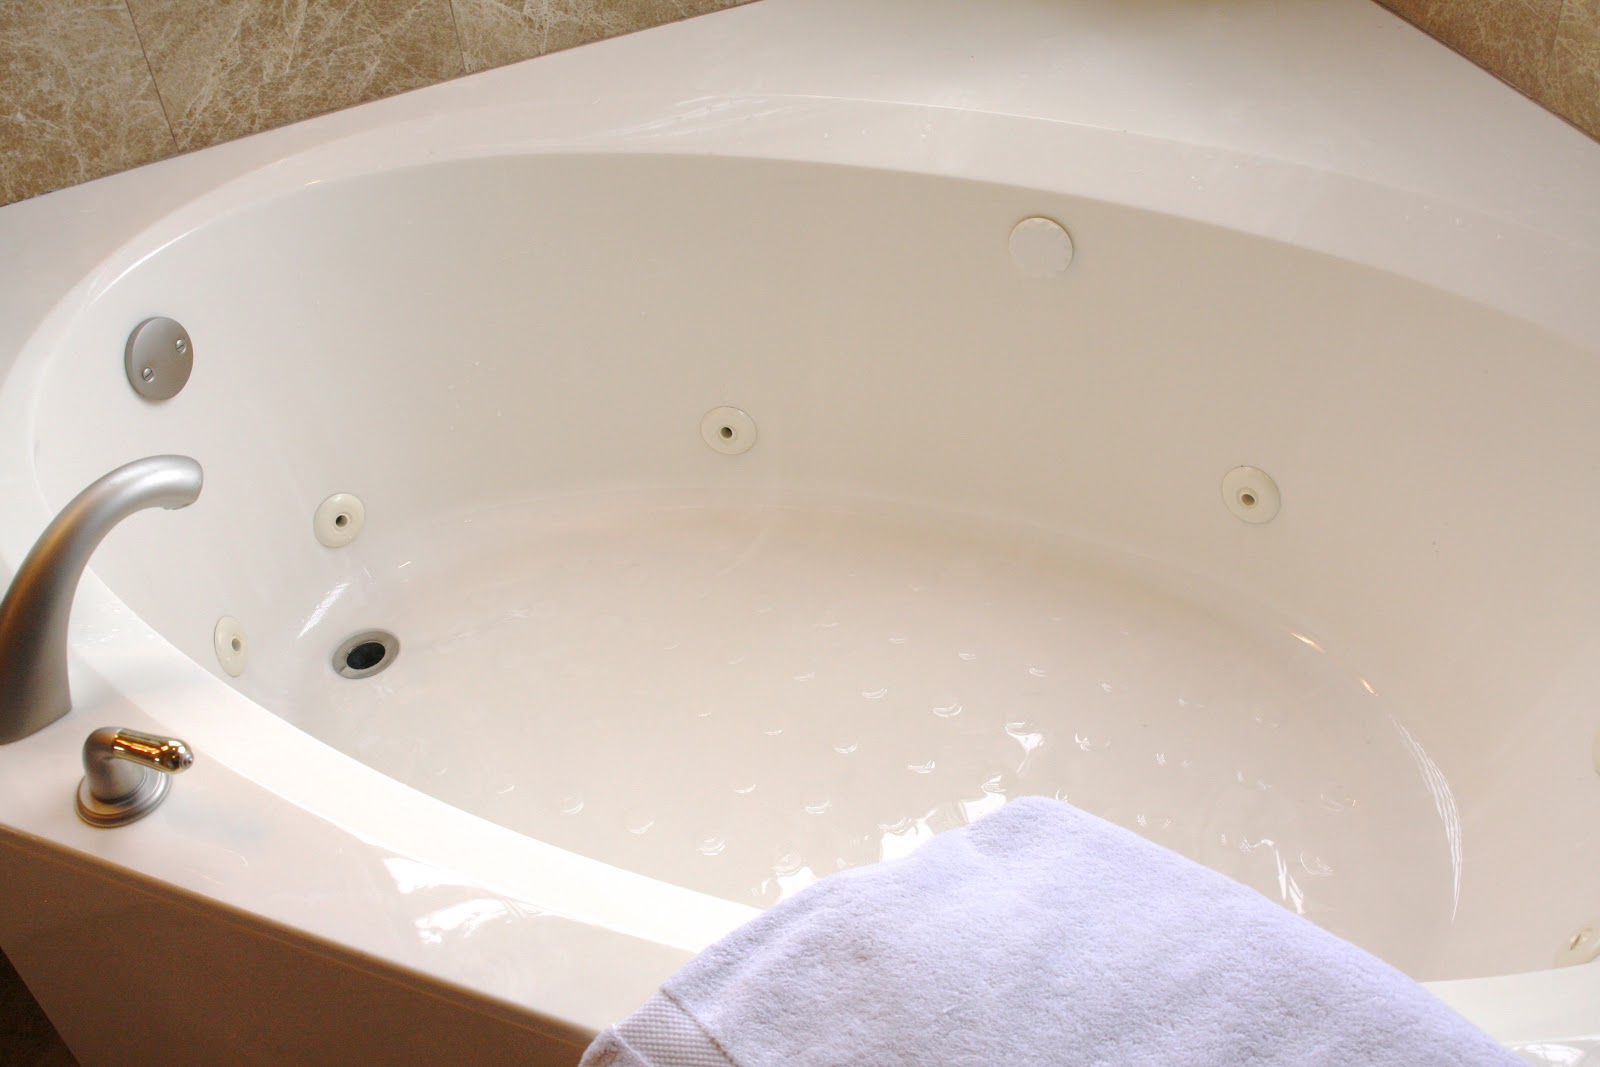 How To Clean Whirlpool Tub Jets, How To Sanitize A Jacuzzi Bathtub